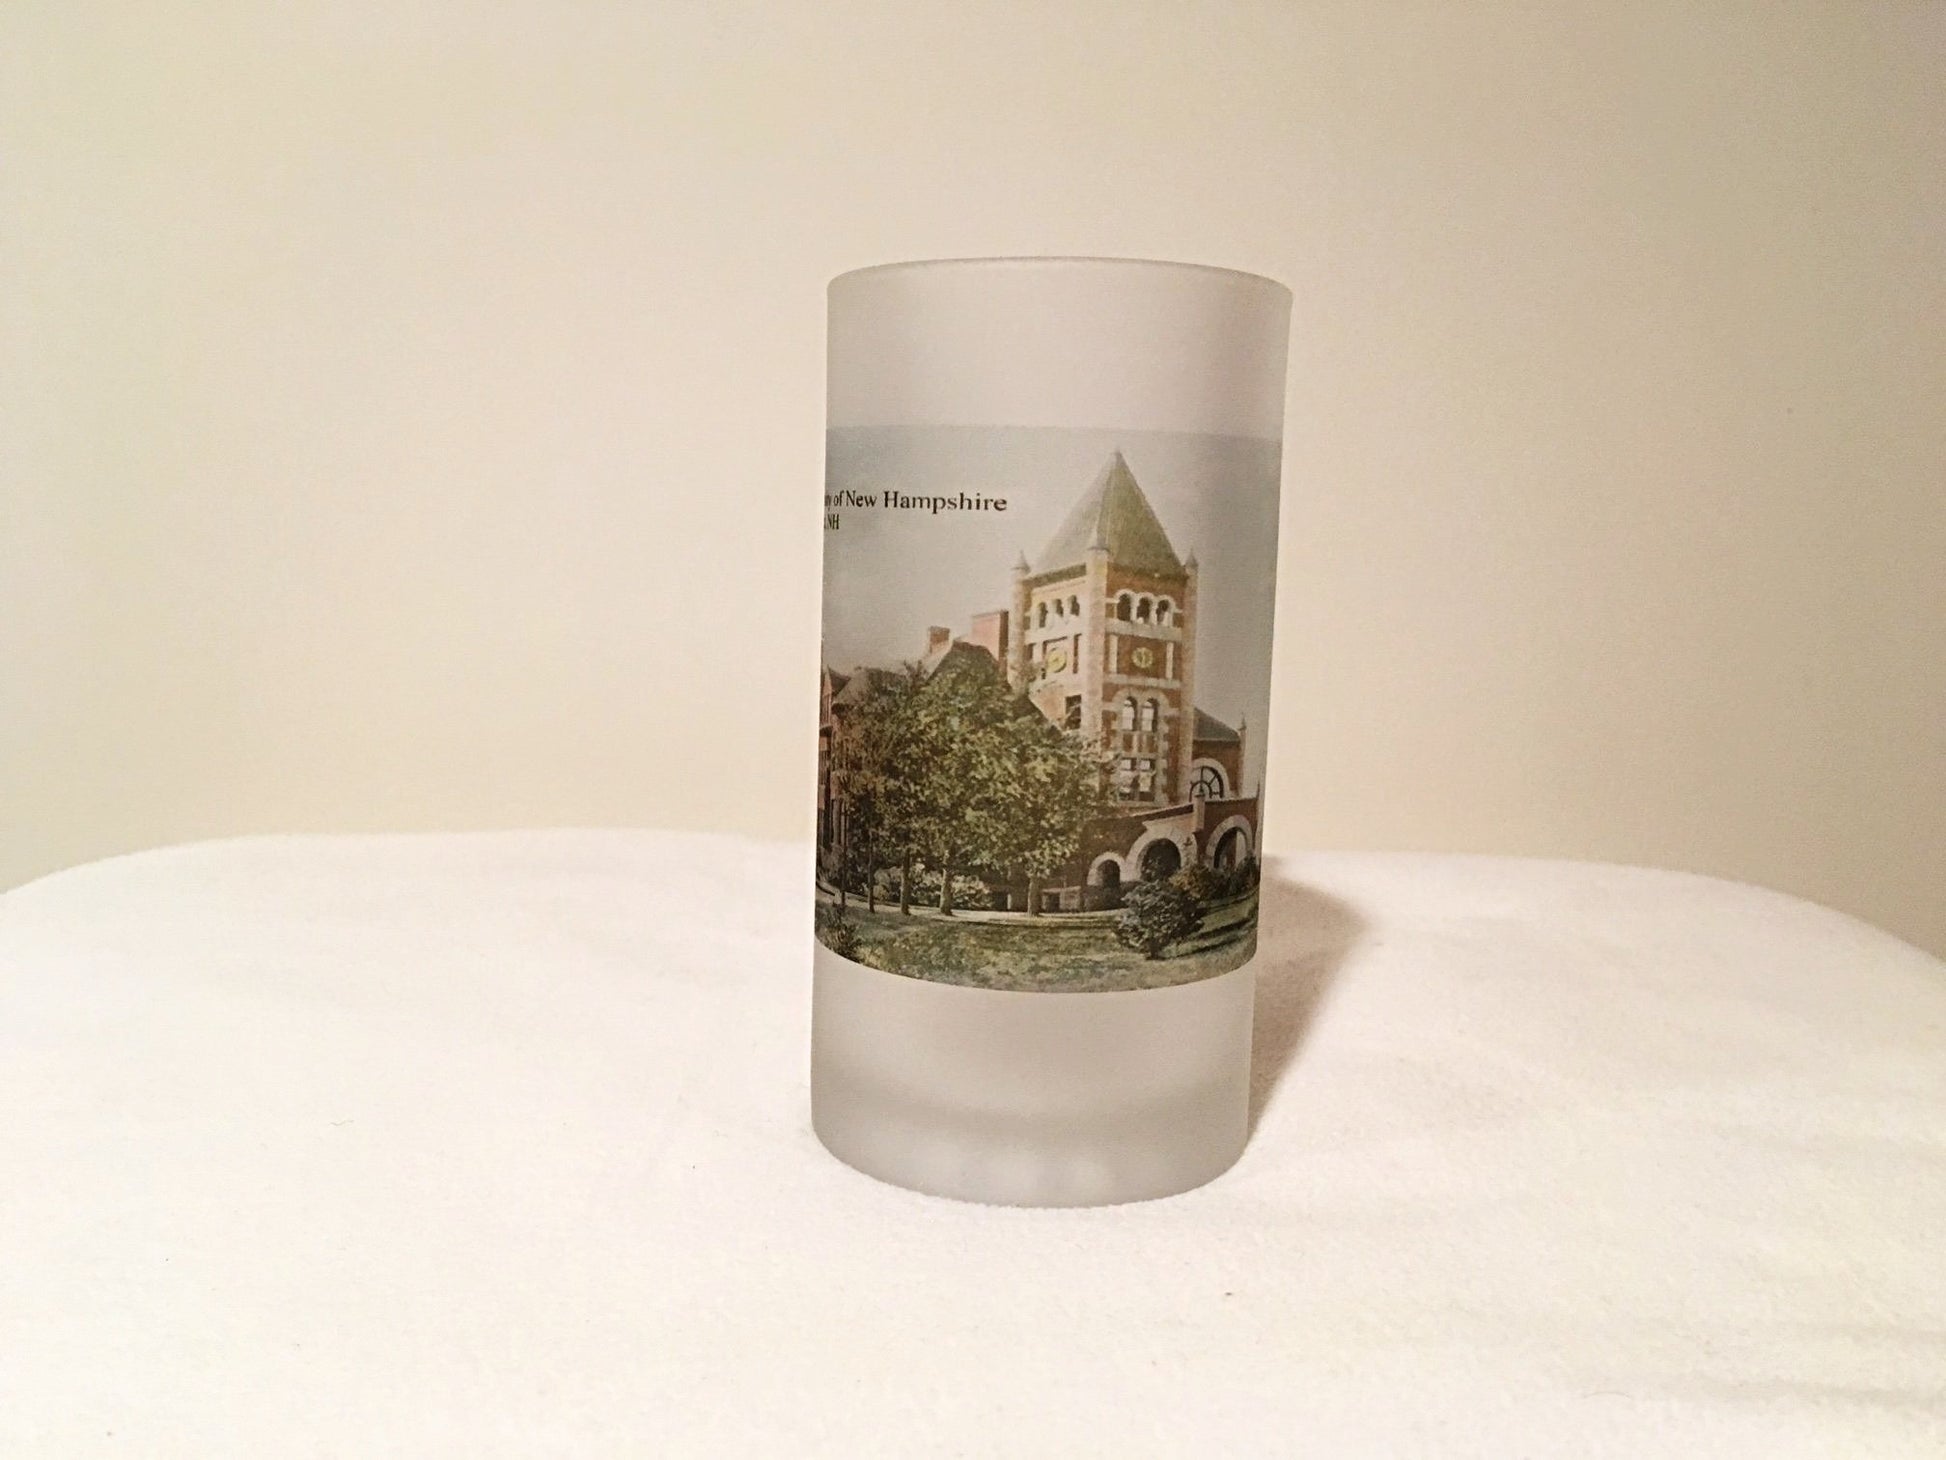 The University of New Hampshire Beer Mug Featuring Thompson Hall - That Fabled Shore Home Decor